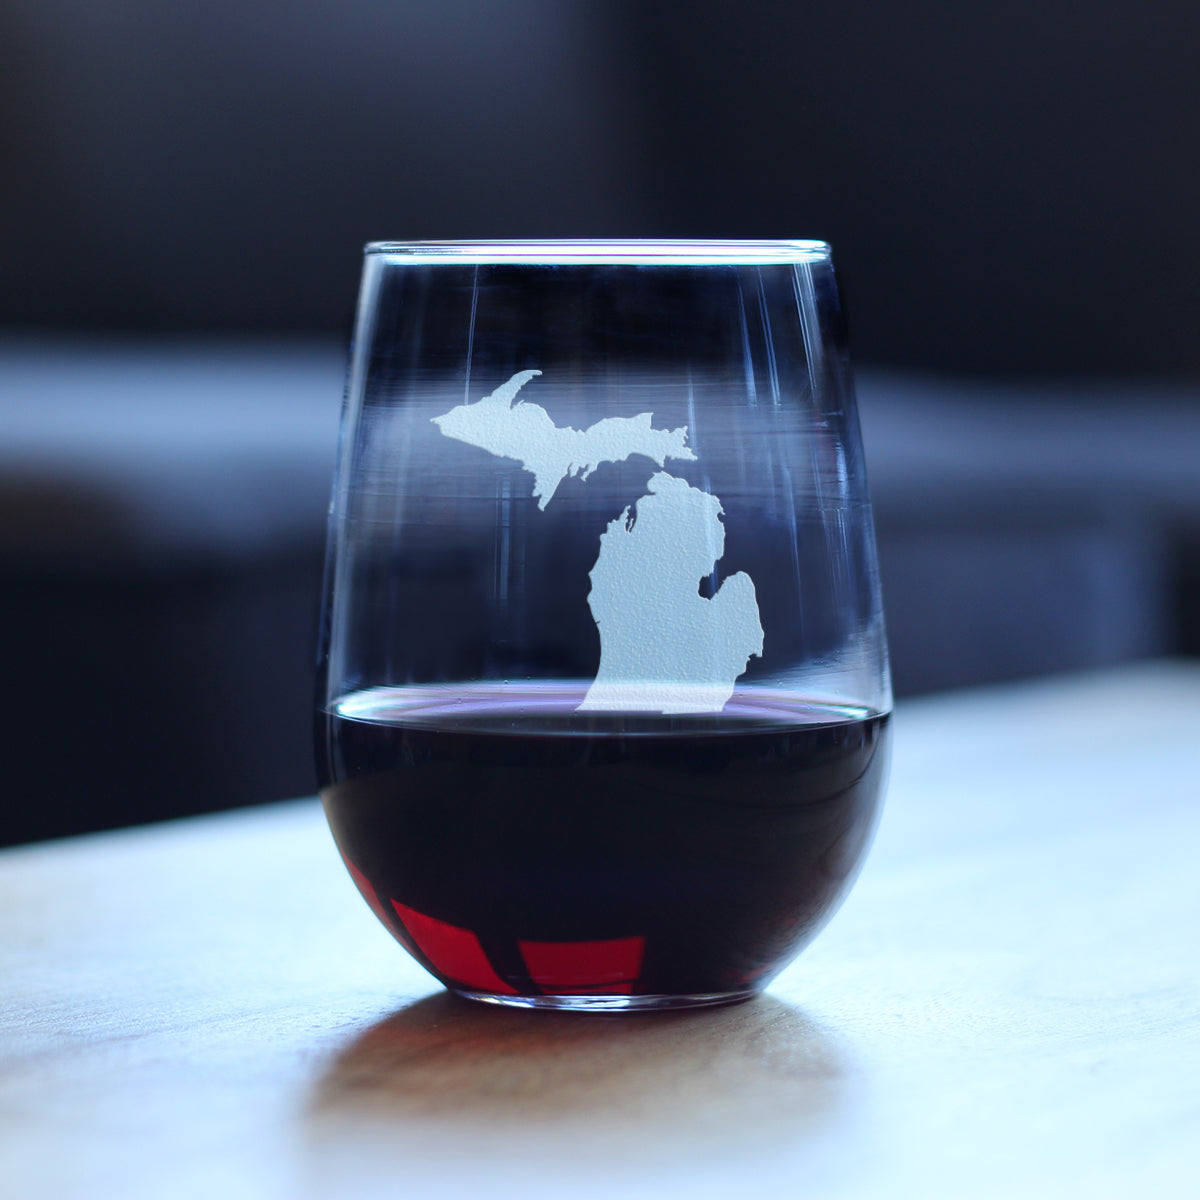 Michigan State Outline Stemless Wine Glass - State Themed Drinking Decor and Gifts for Michigander Women &amp; Men - Large 17 Oz Glasses